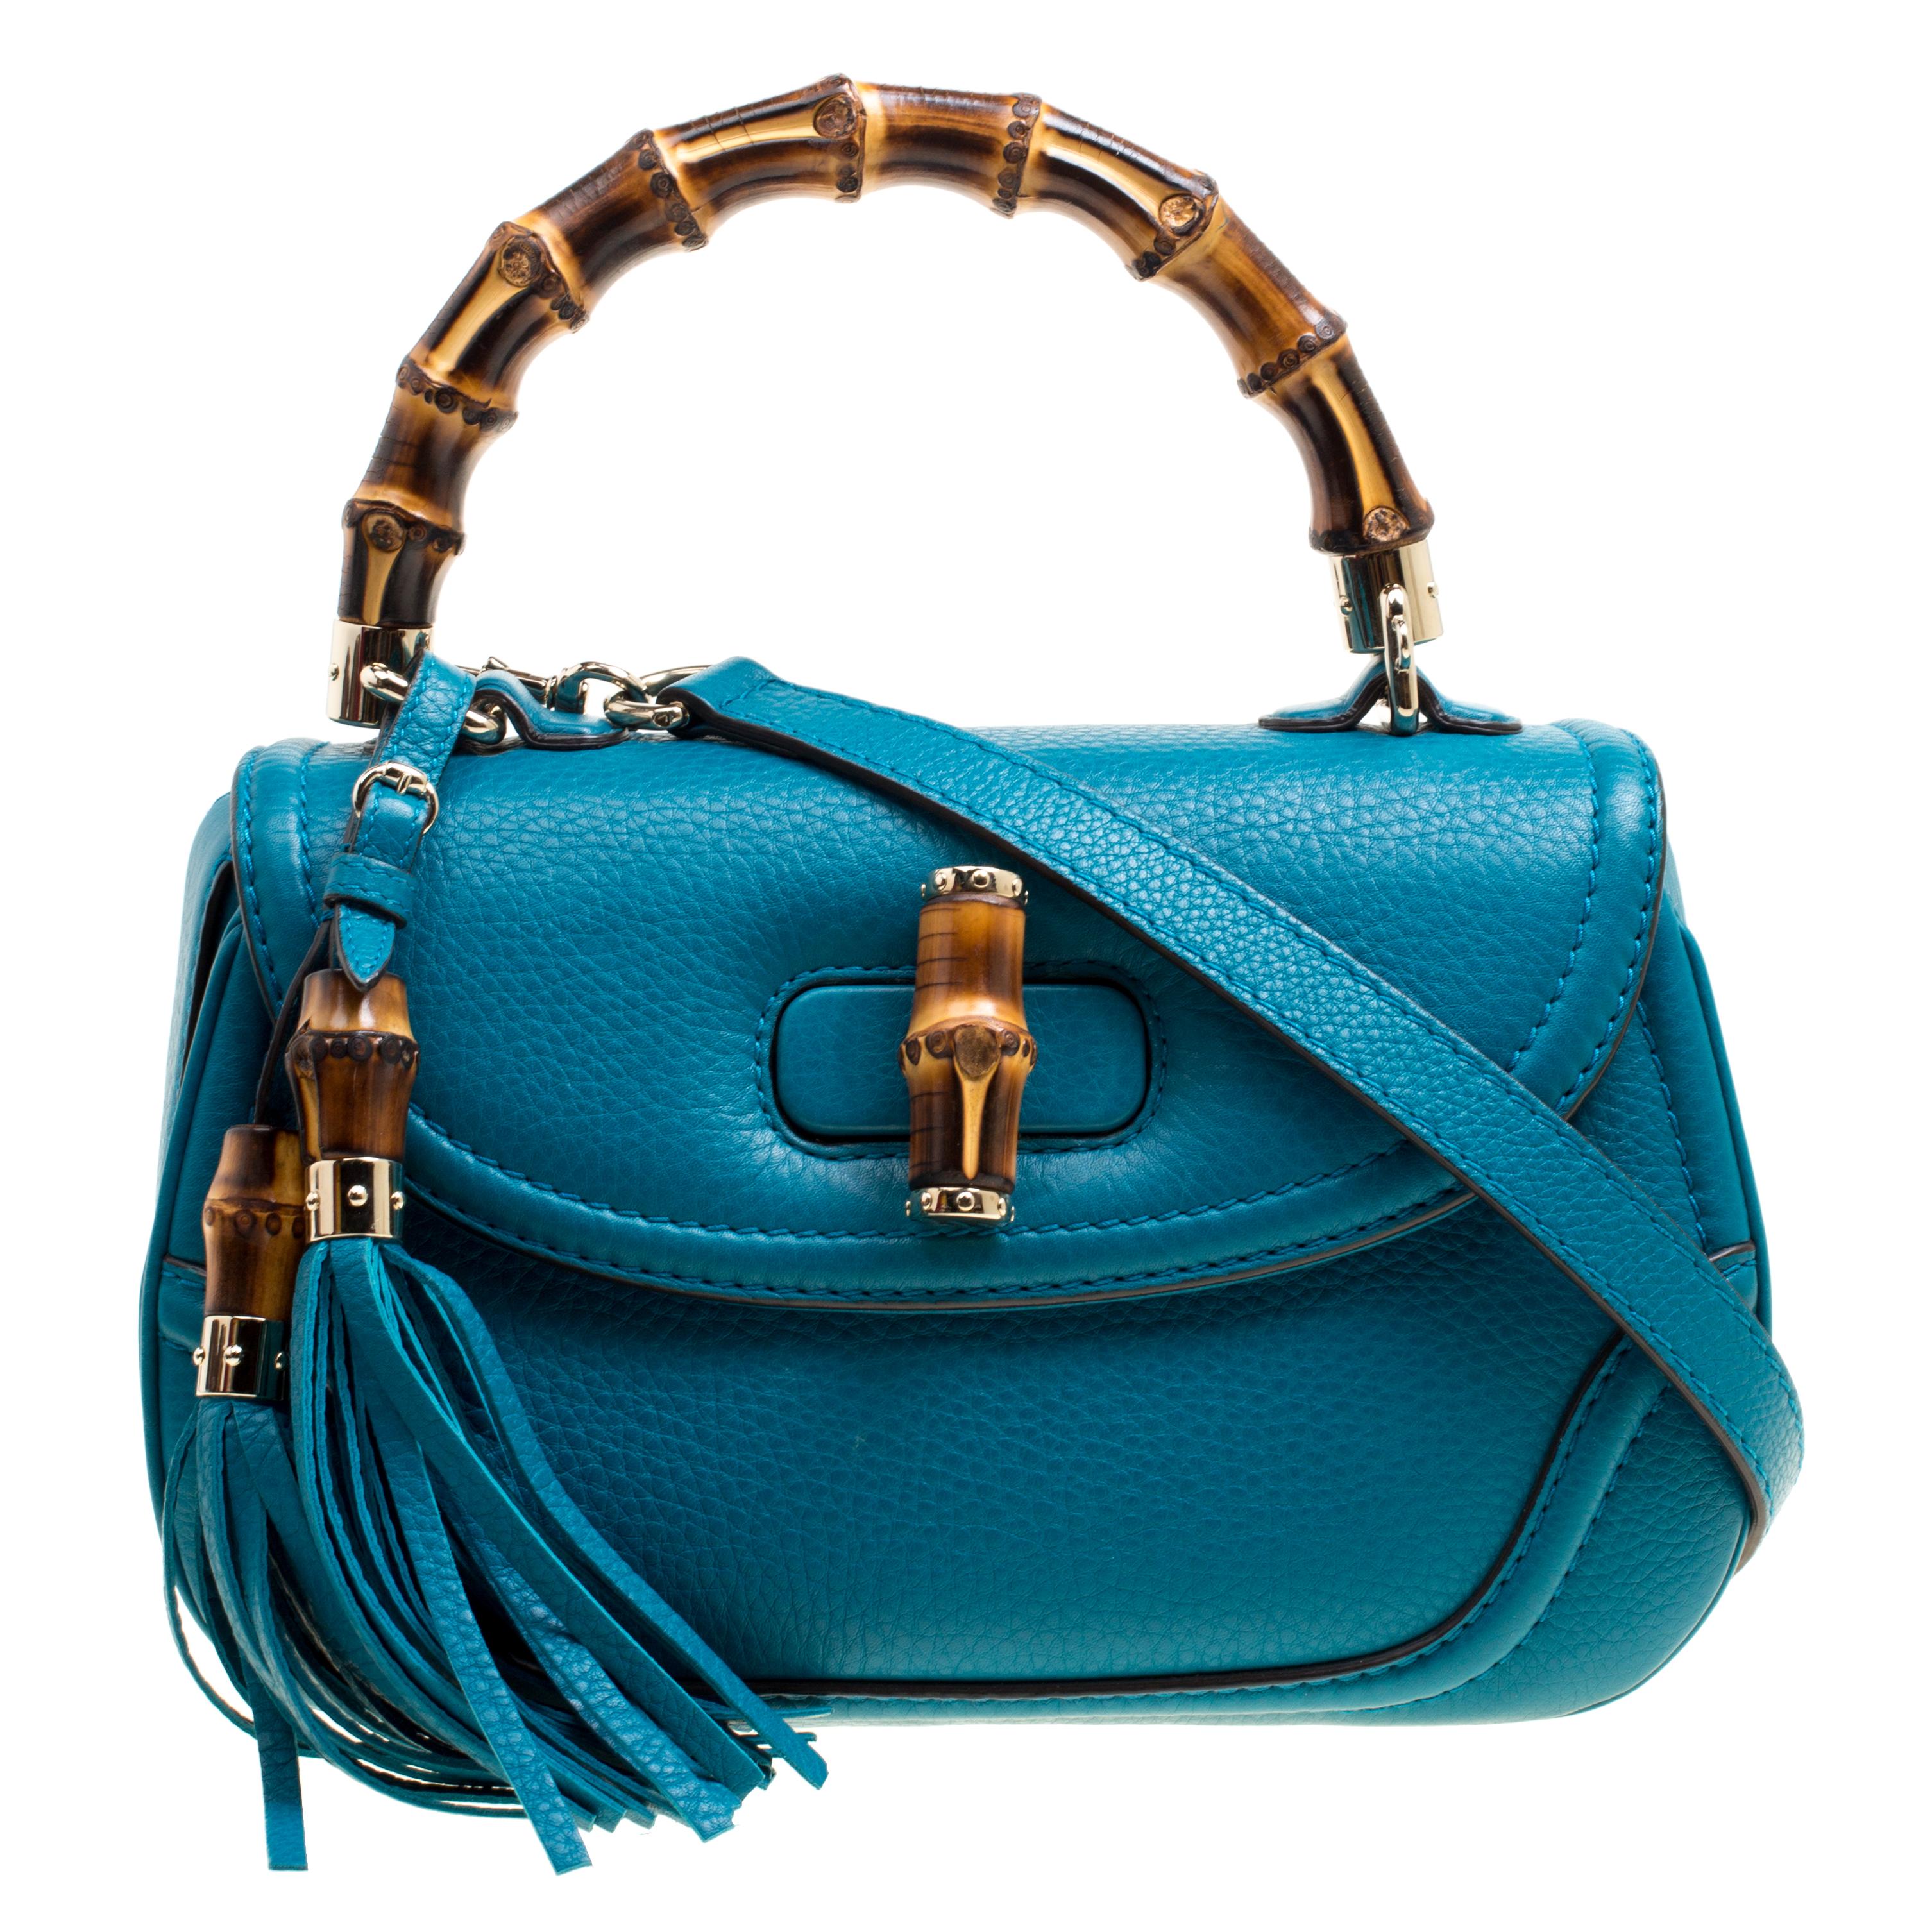 Gucci Teal Blue Leather Tassel New Bamboo Top Handle Bag